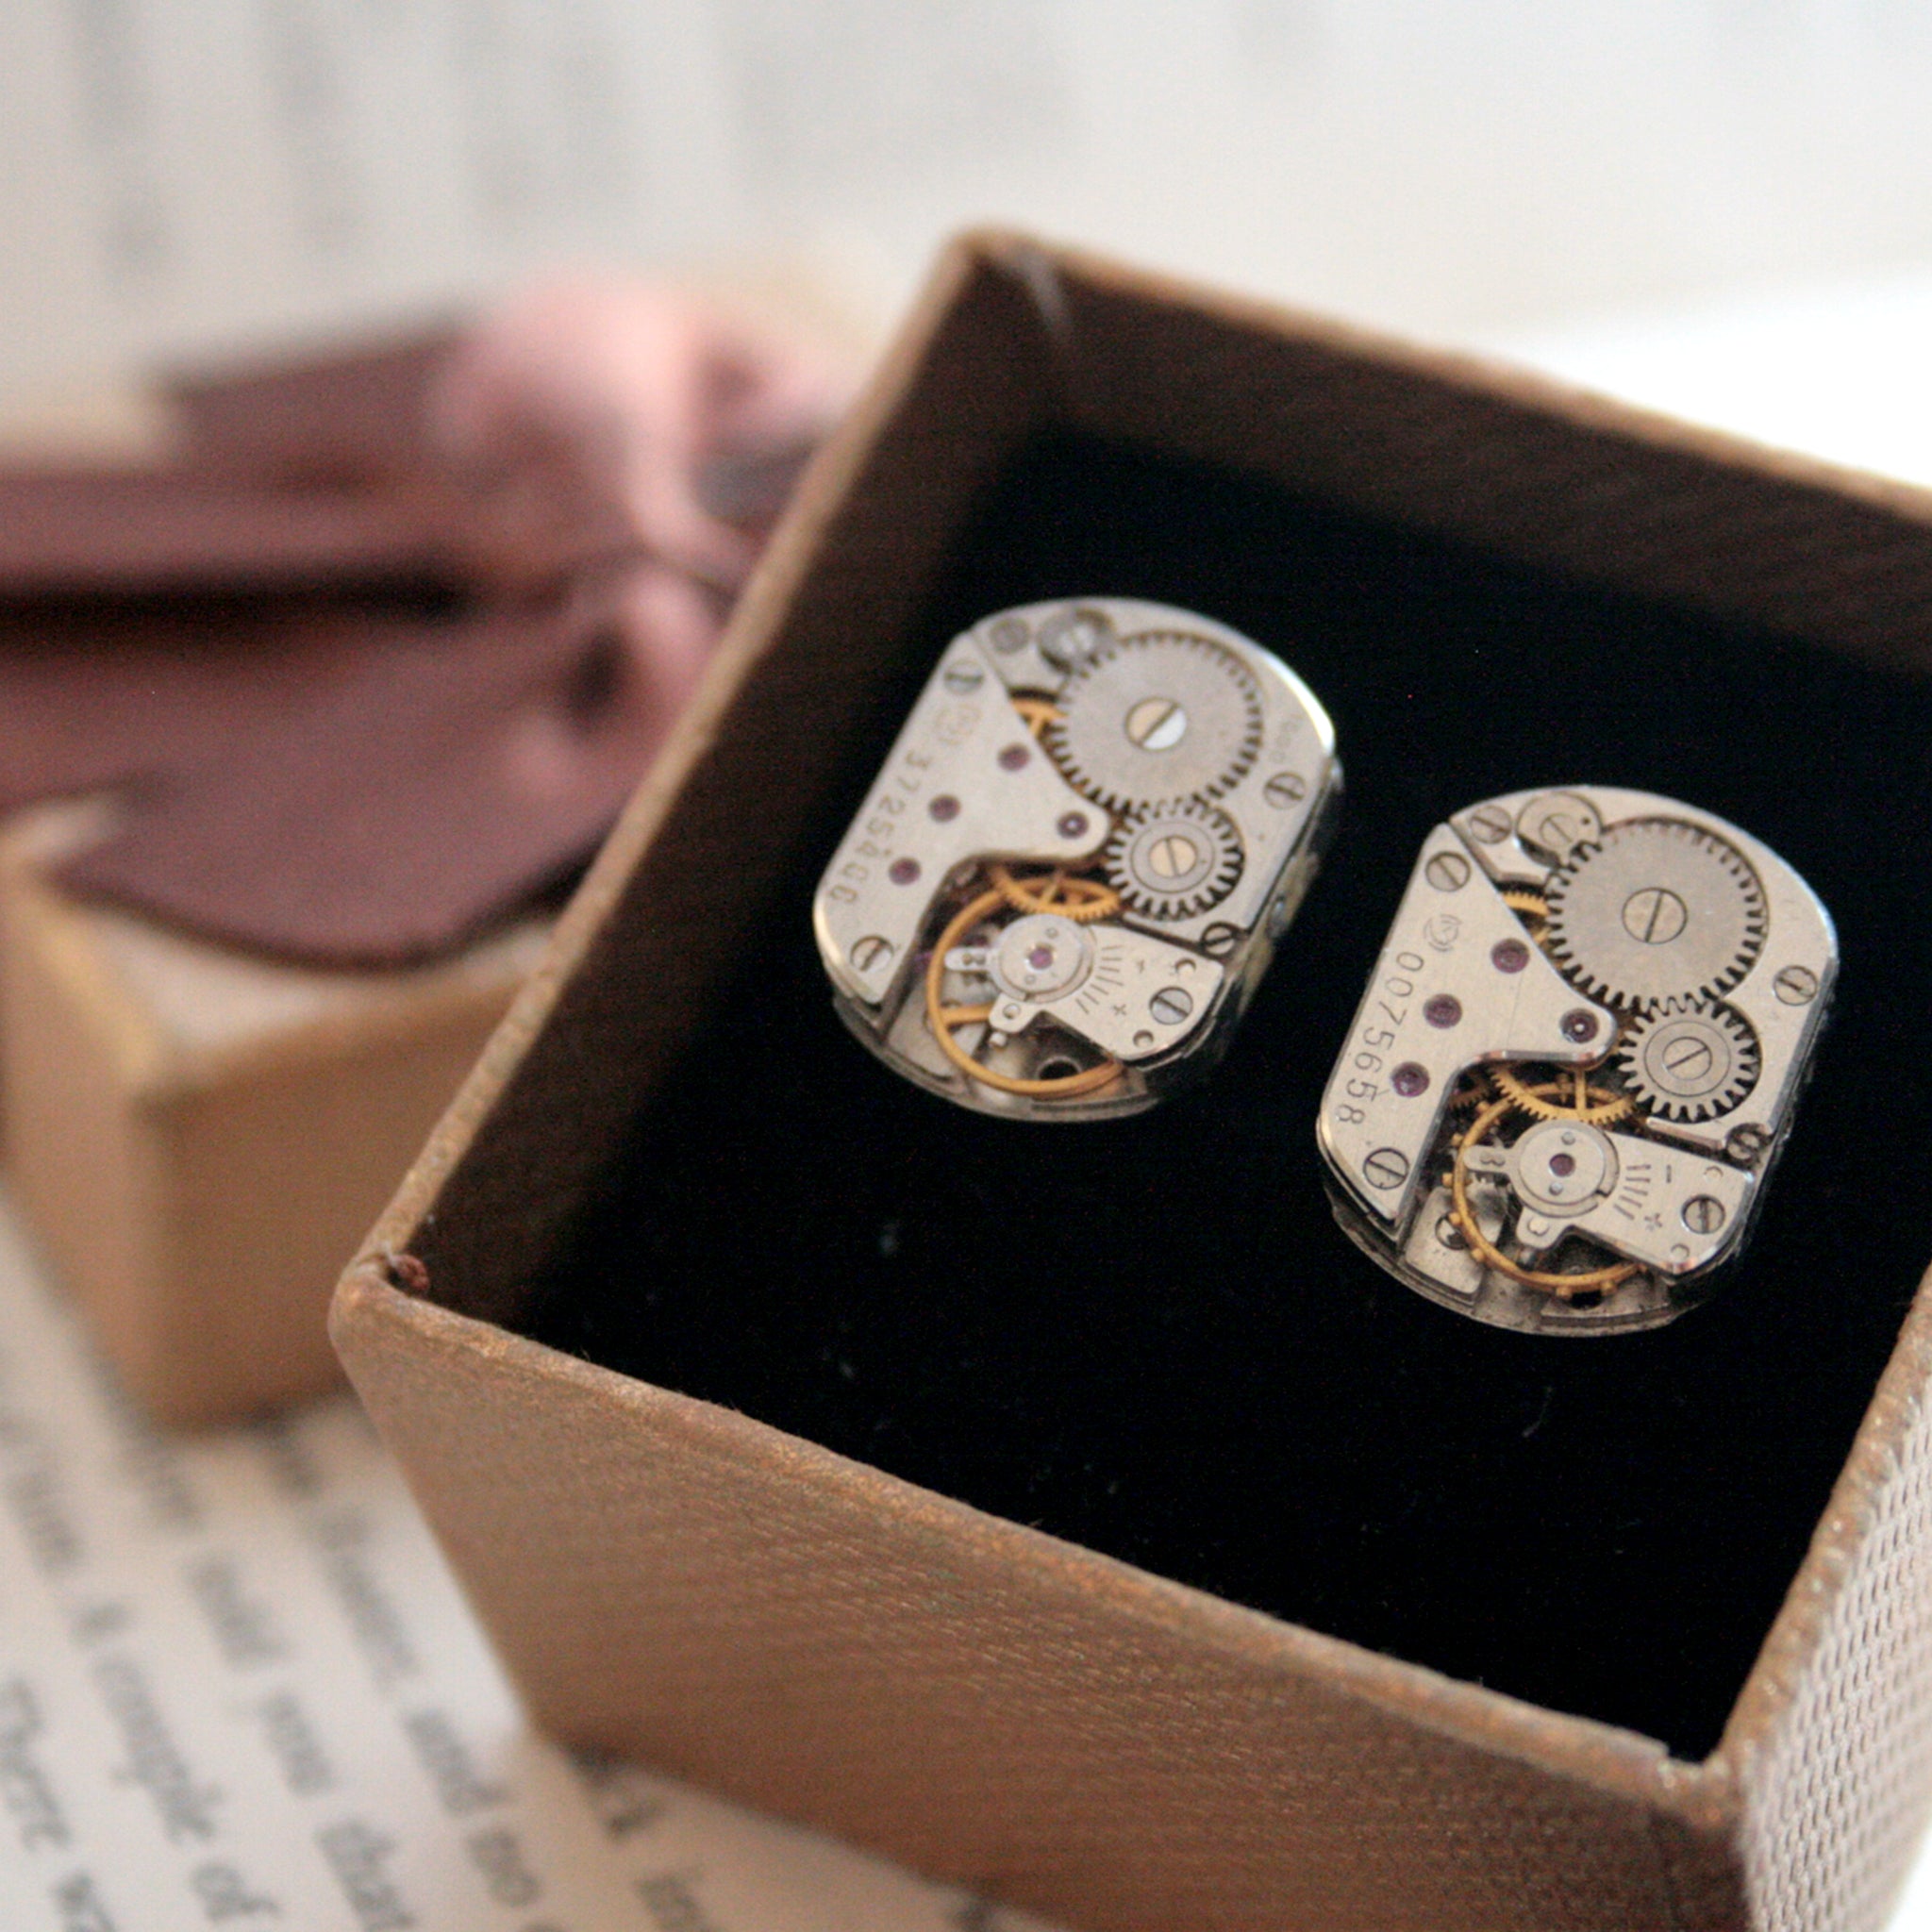 Steampunk Cufflinks featuring antique watch movements in a gift box